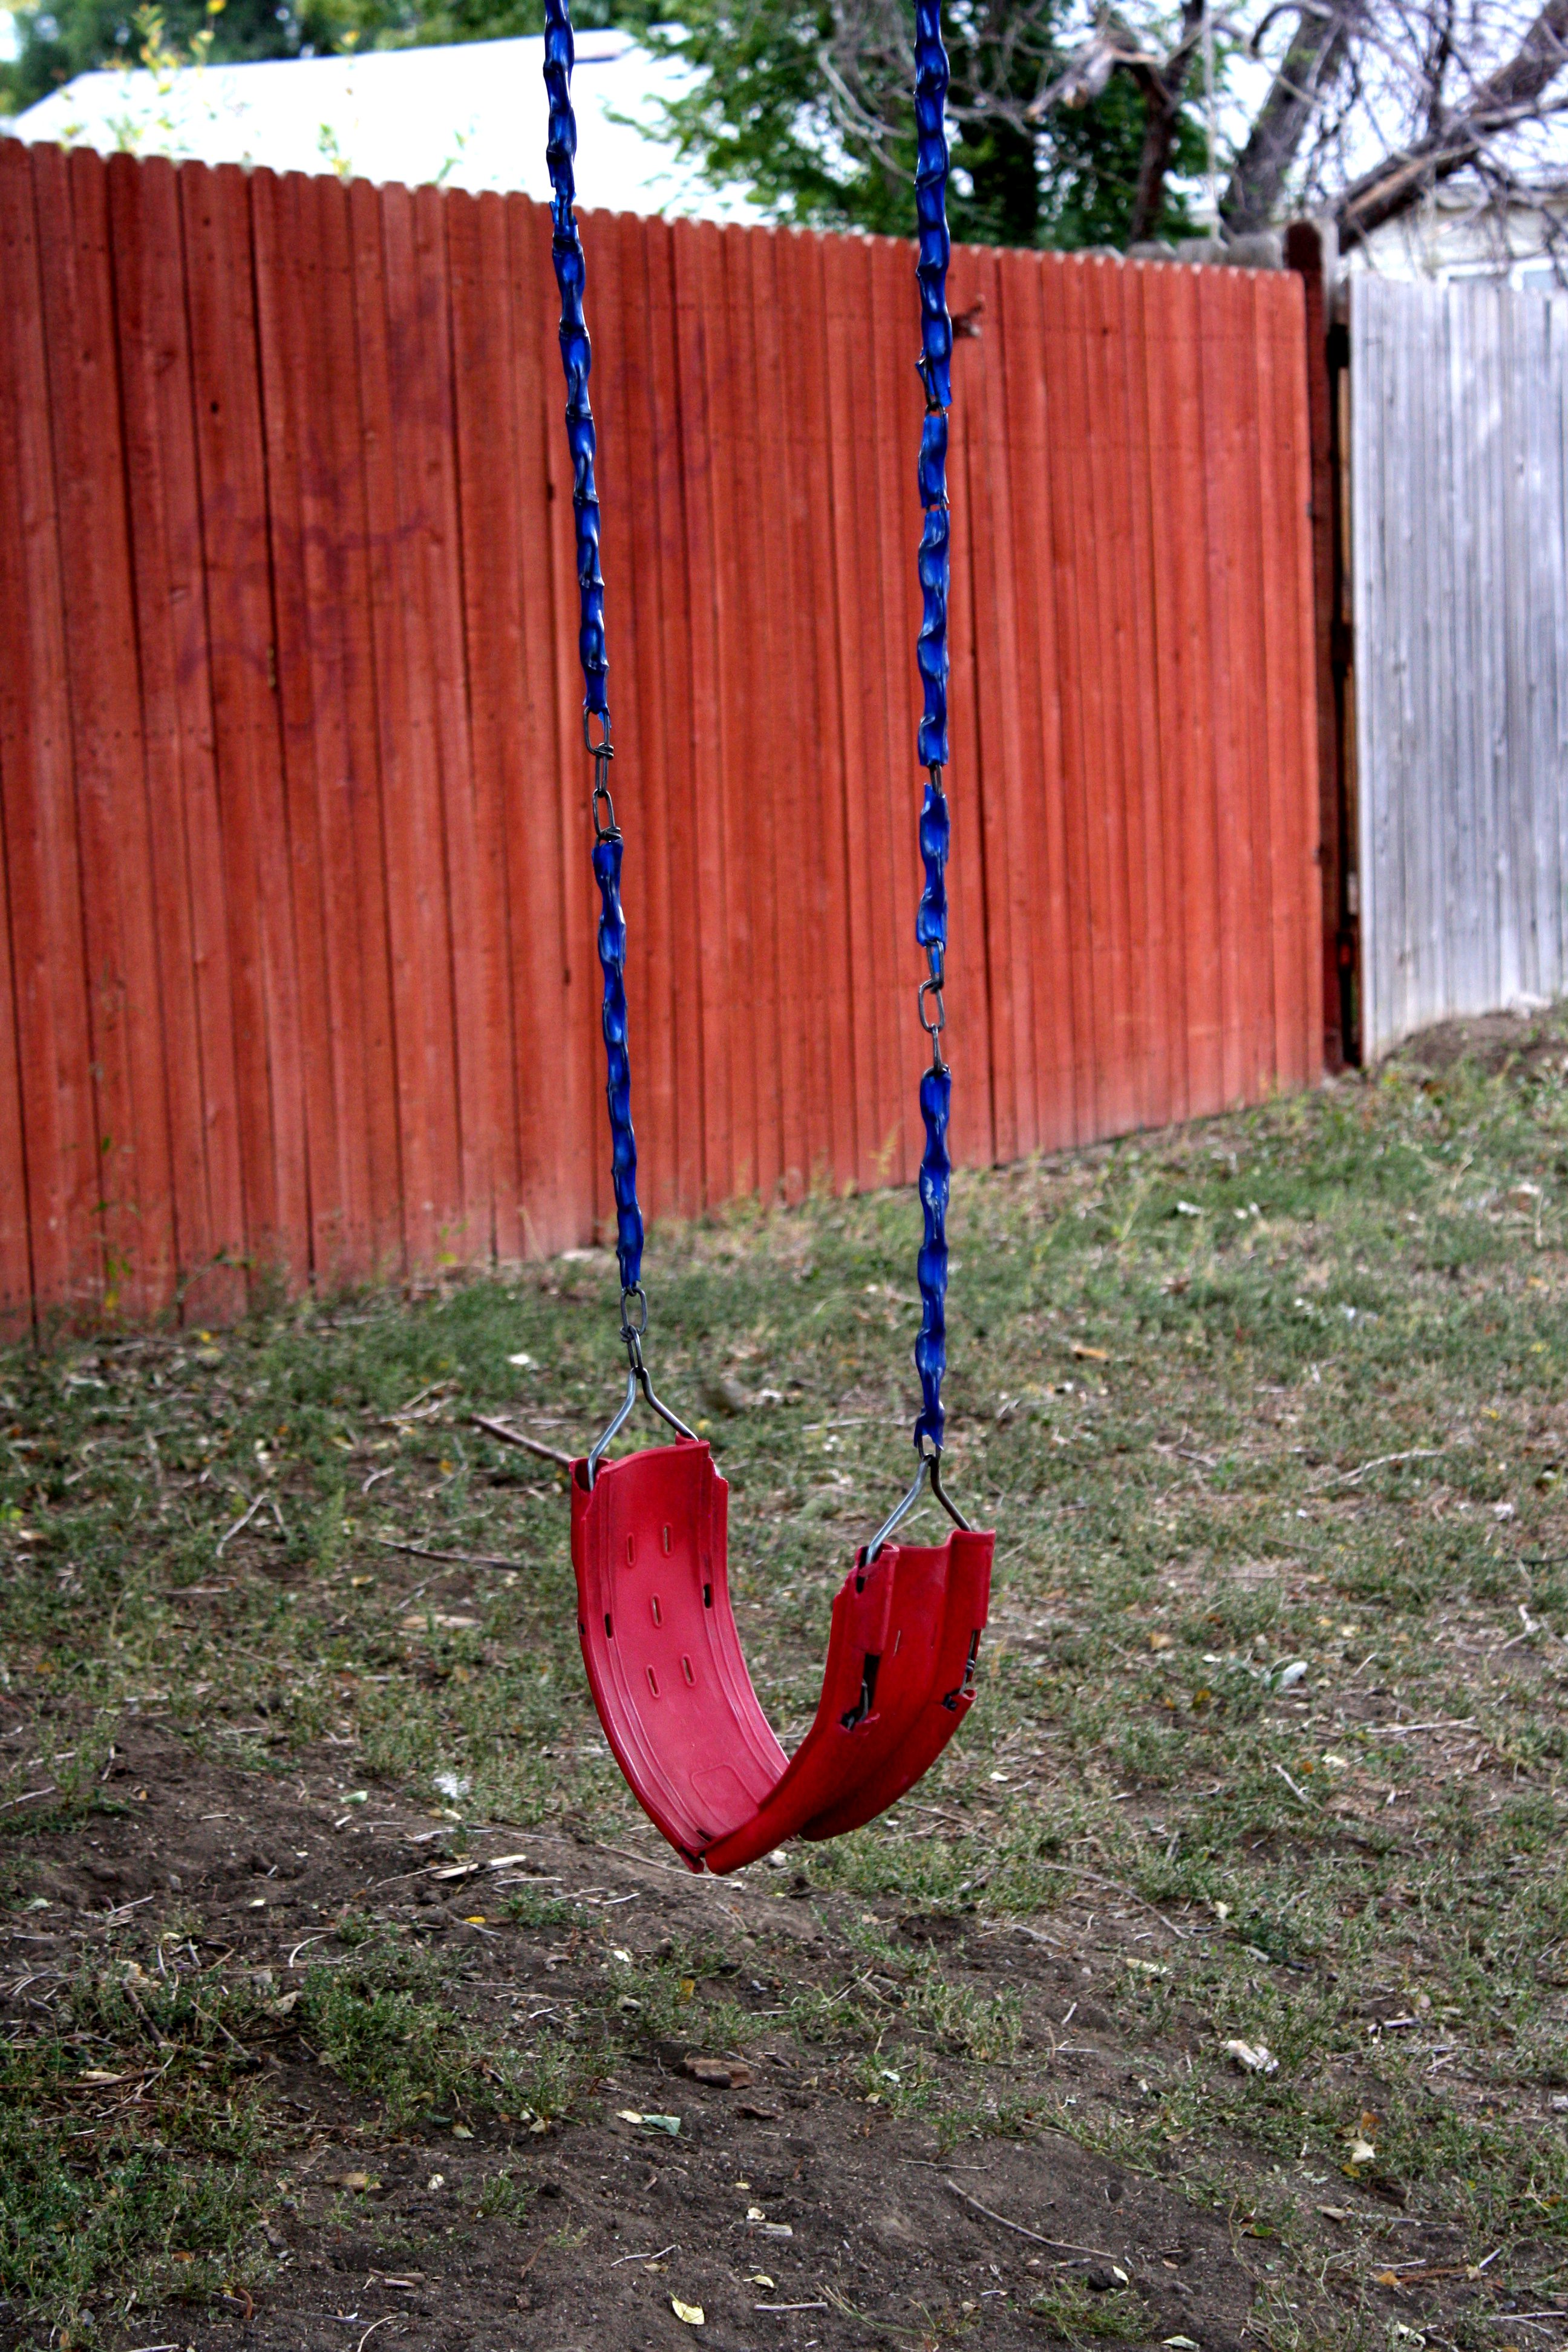 Red Swing Picture | Free Photograph | Photos Public Domain